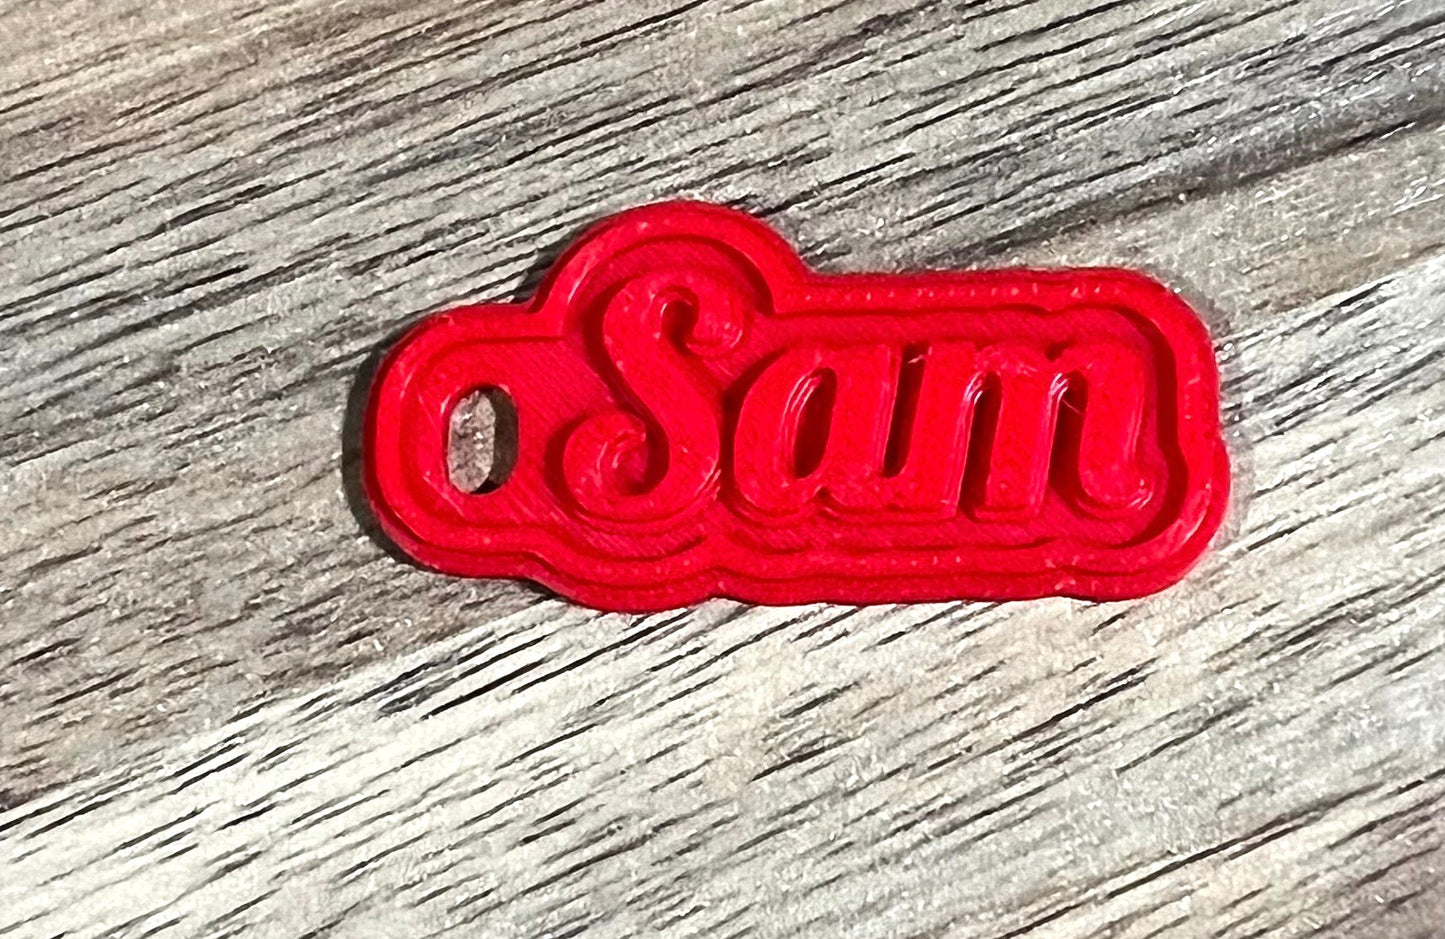 3D Printed Personalized Keychain, 3D Printed with your choice of text. Bag Tag, Keychain gift